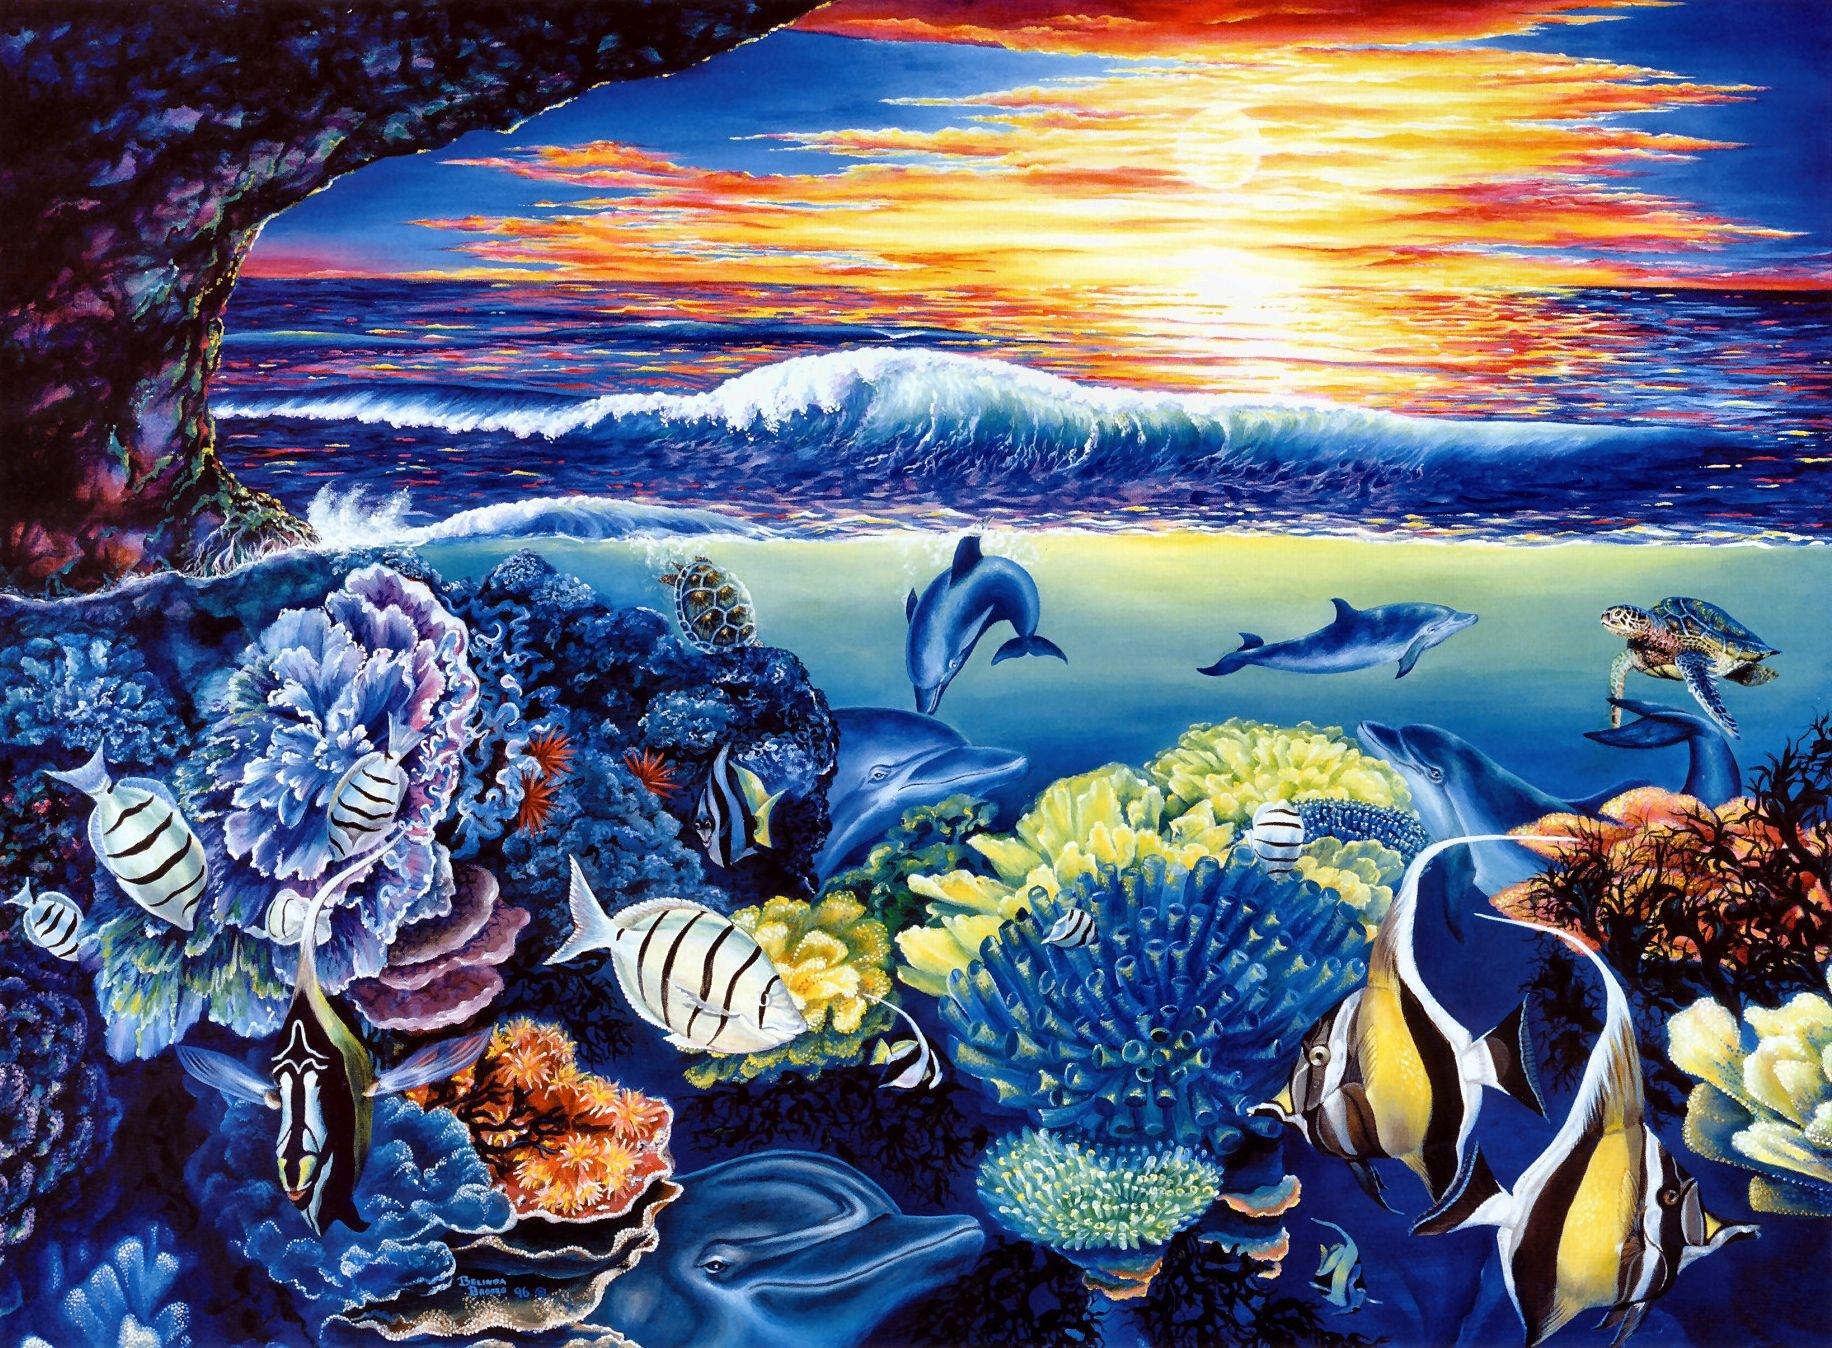 Marine life painting - - High Quality and Resolution